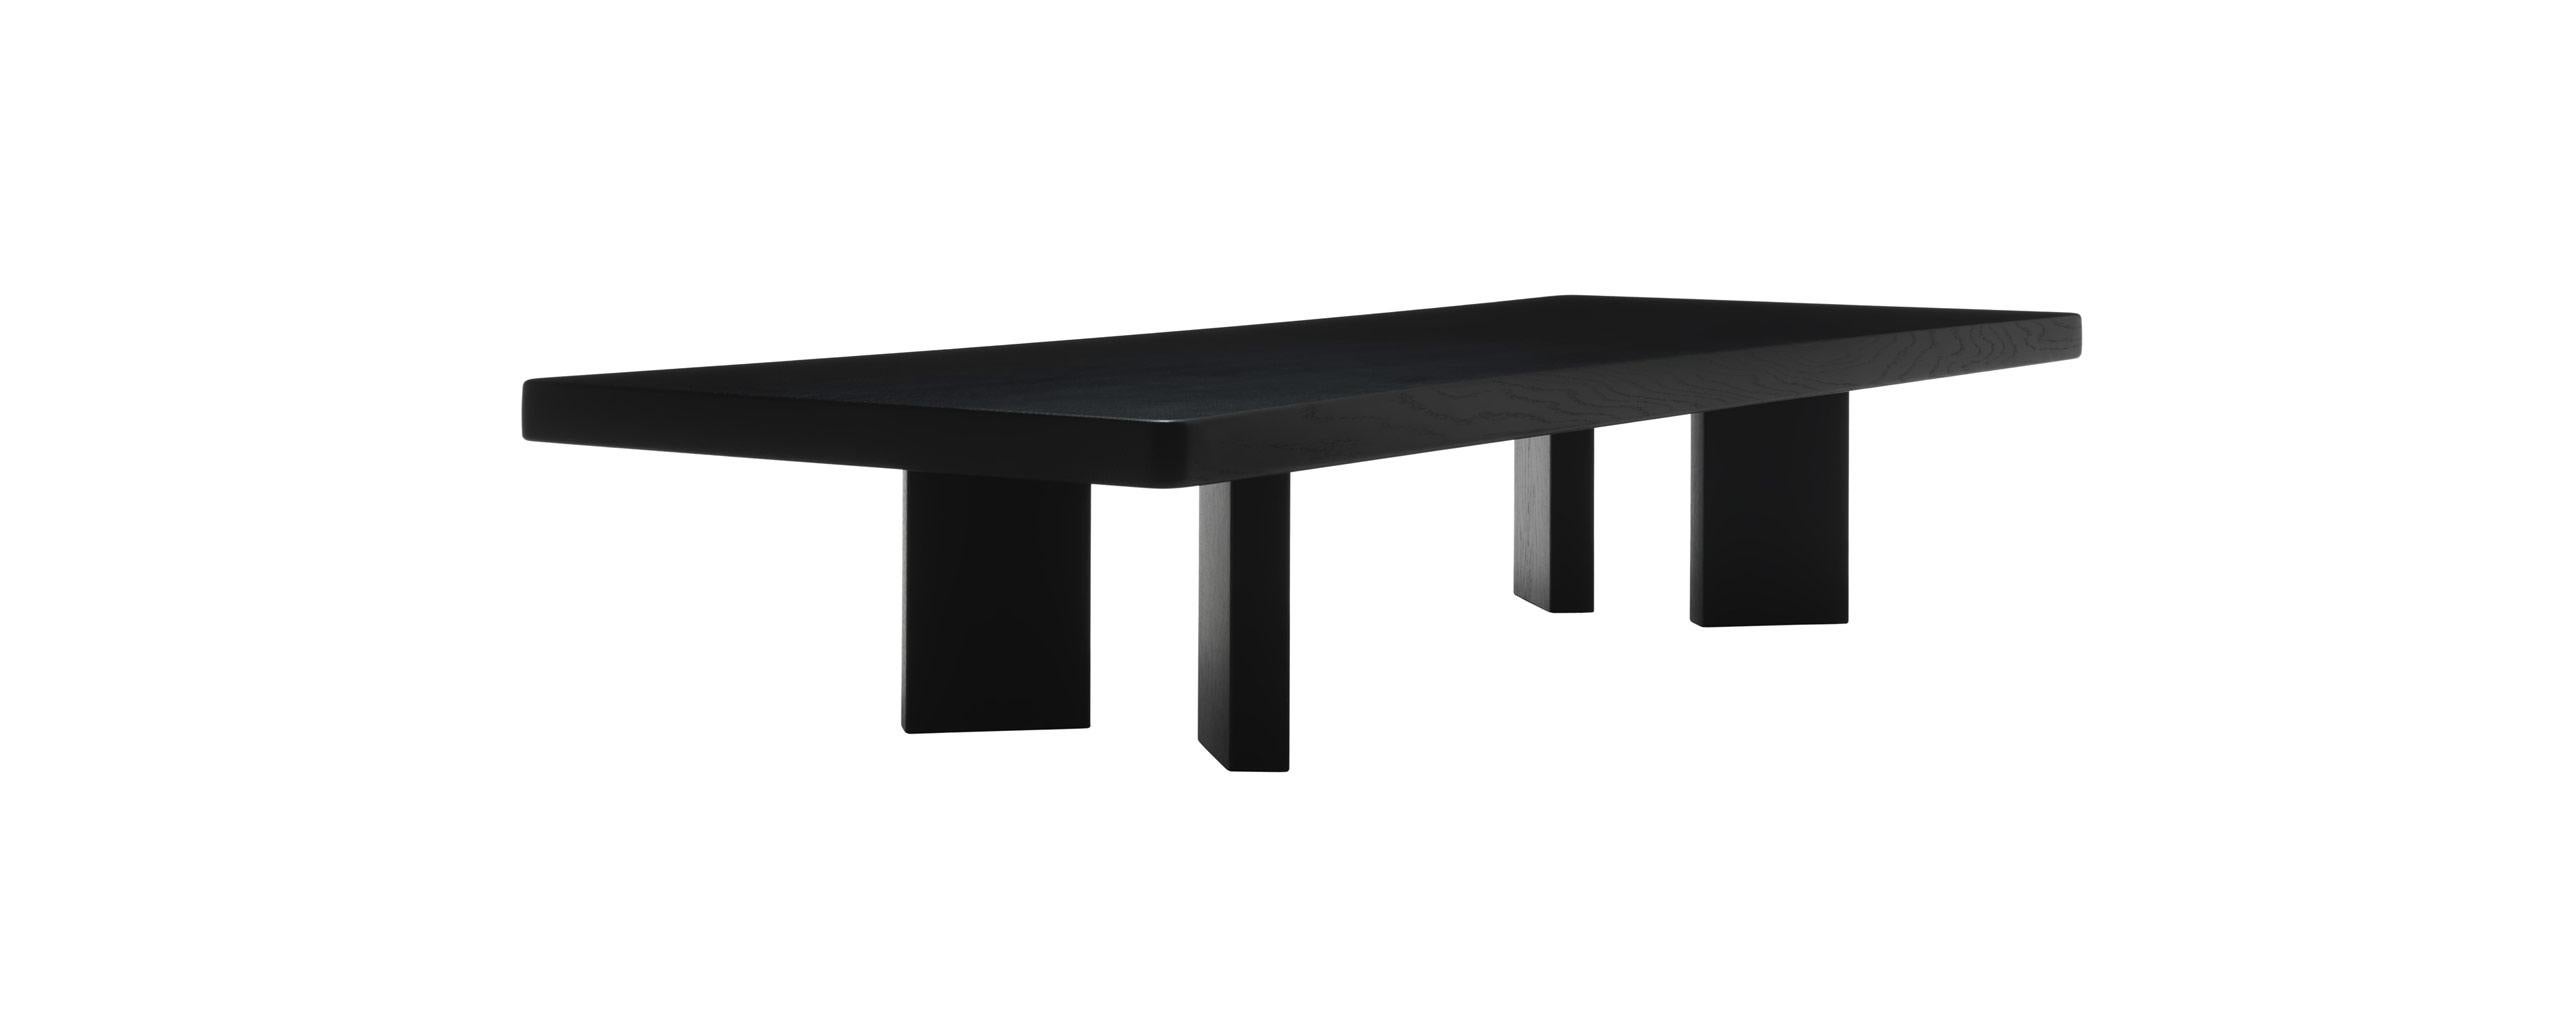 Italian Charlotte Perriand 515 Plana Coffee Table, Black Stained Wood by Cassina For Sale